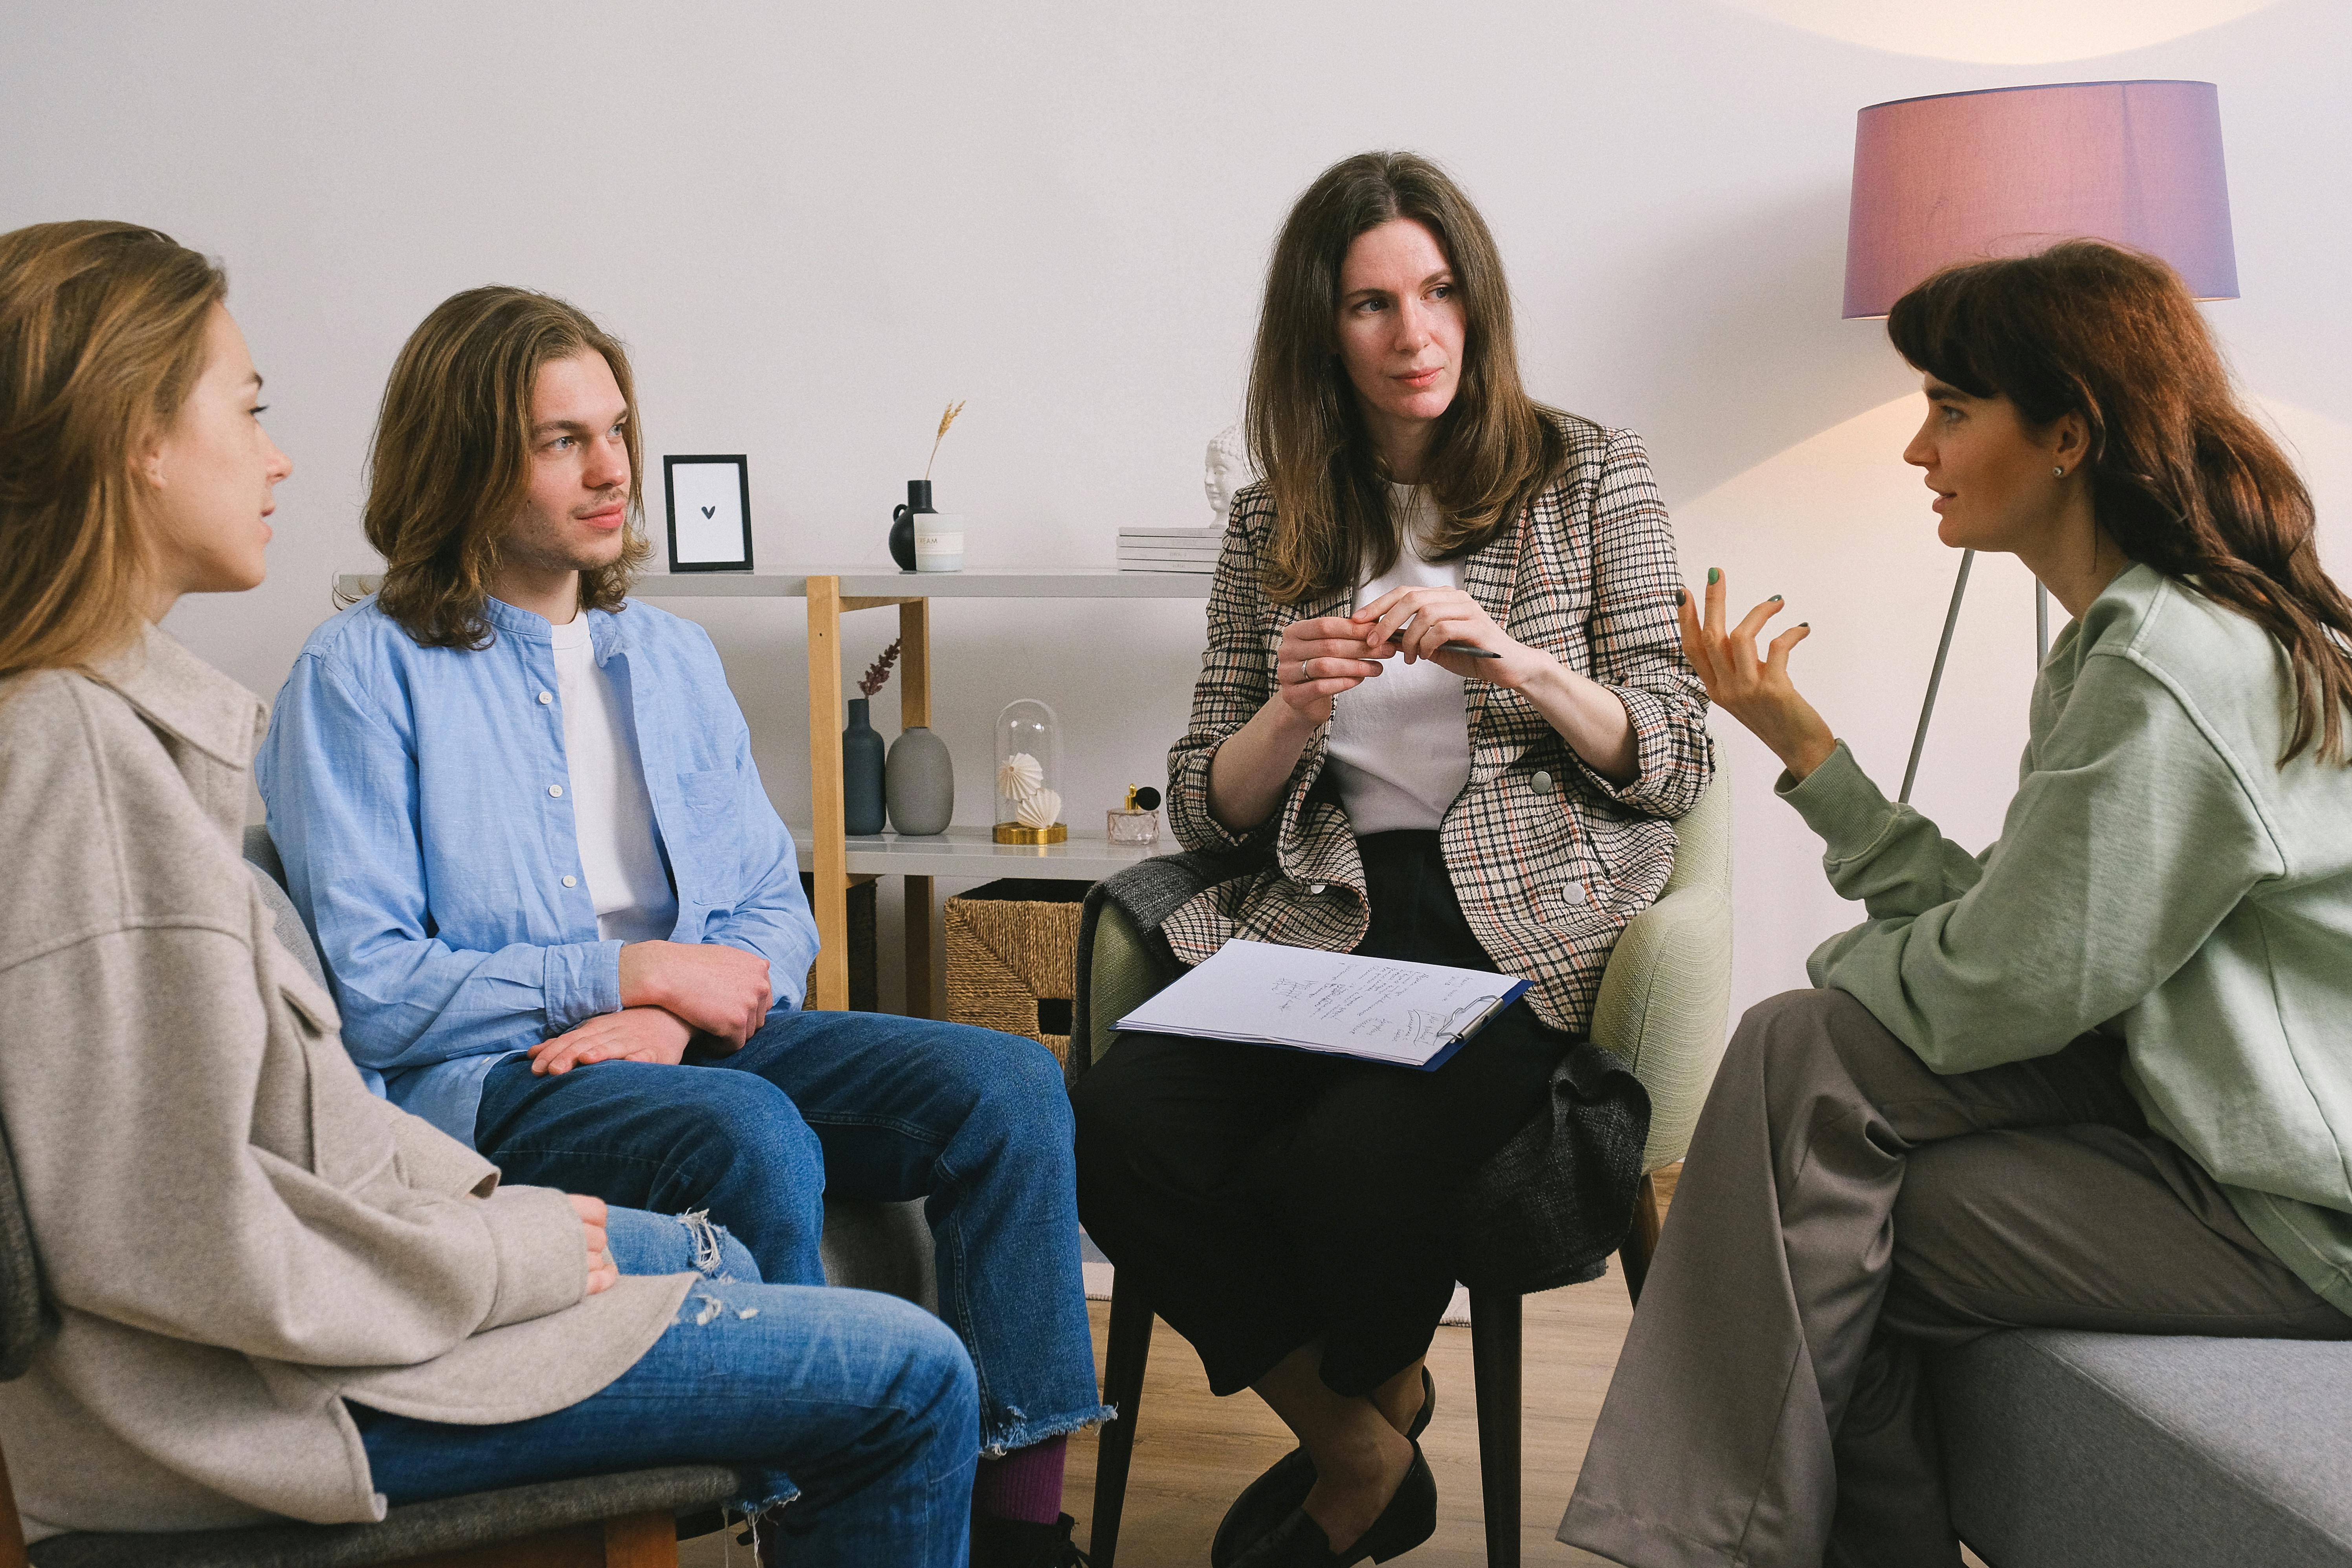 woman discussing problem during group therapy